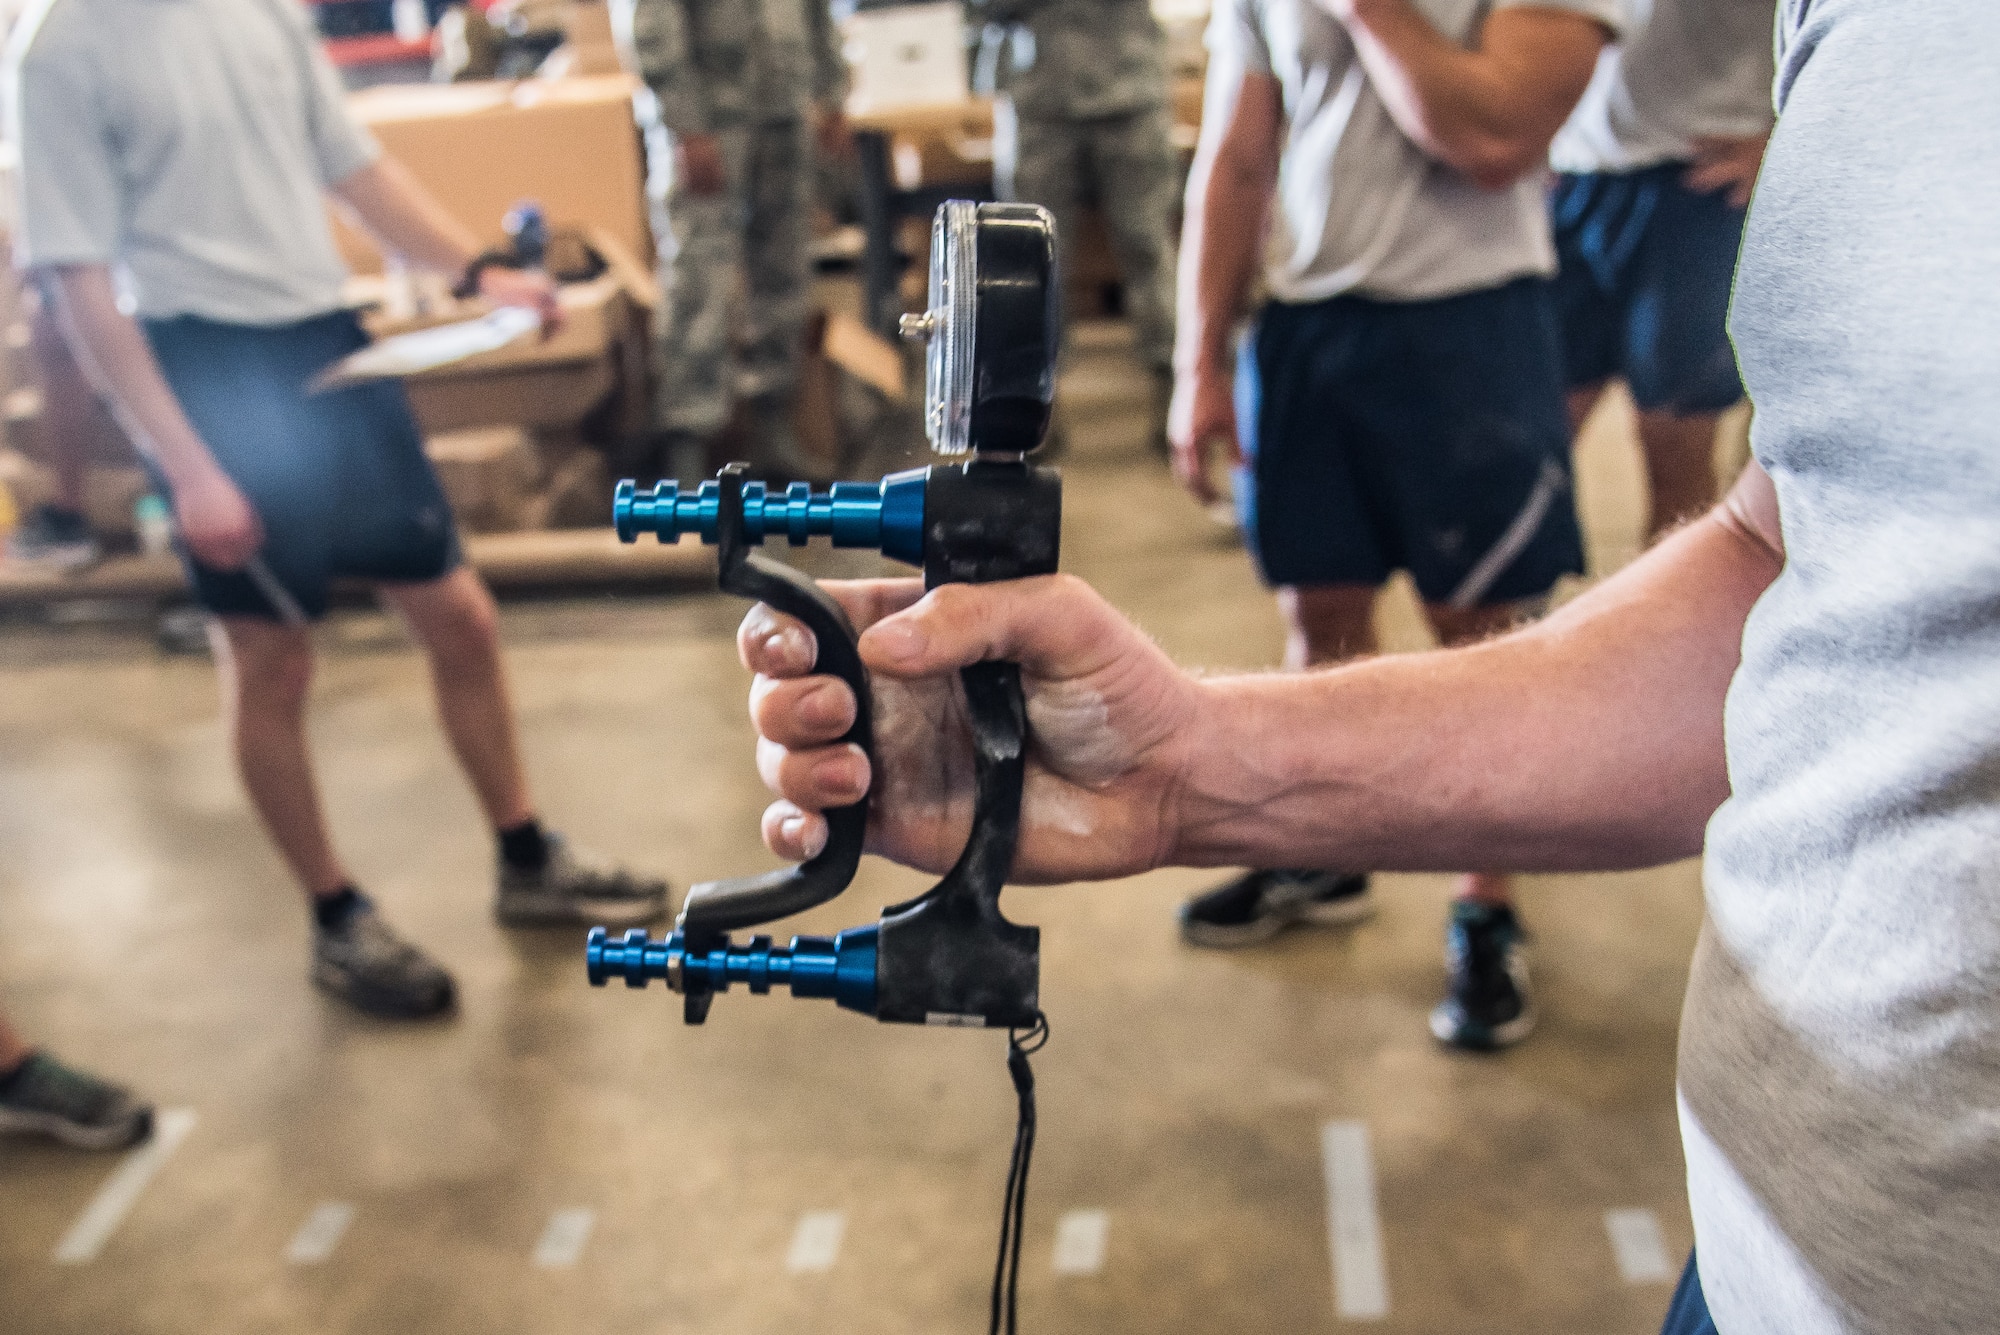 Master Sgt. Garth Muenter, the 512th Explosive Ordnance Disposal manager performs the Grip Strength component during the EOD Tier 2 Physical Fitness Test Prototype at Dover Air Force Base, Del., Aug. 8, 2018. EOD Airmen testing on the Grip Strength component are required to squeeze the dynamometer with maximum strength for two to three seconds. (U.S. Air Force photo by Staff Sgt. Damien Taylor)component are required to squeeze the dynamometer with maximum strength as hard as possible for two or three seconds. (U.S. Air Force photo by Staff Sgt. Damien Taylor)